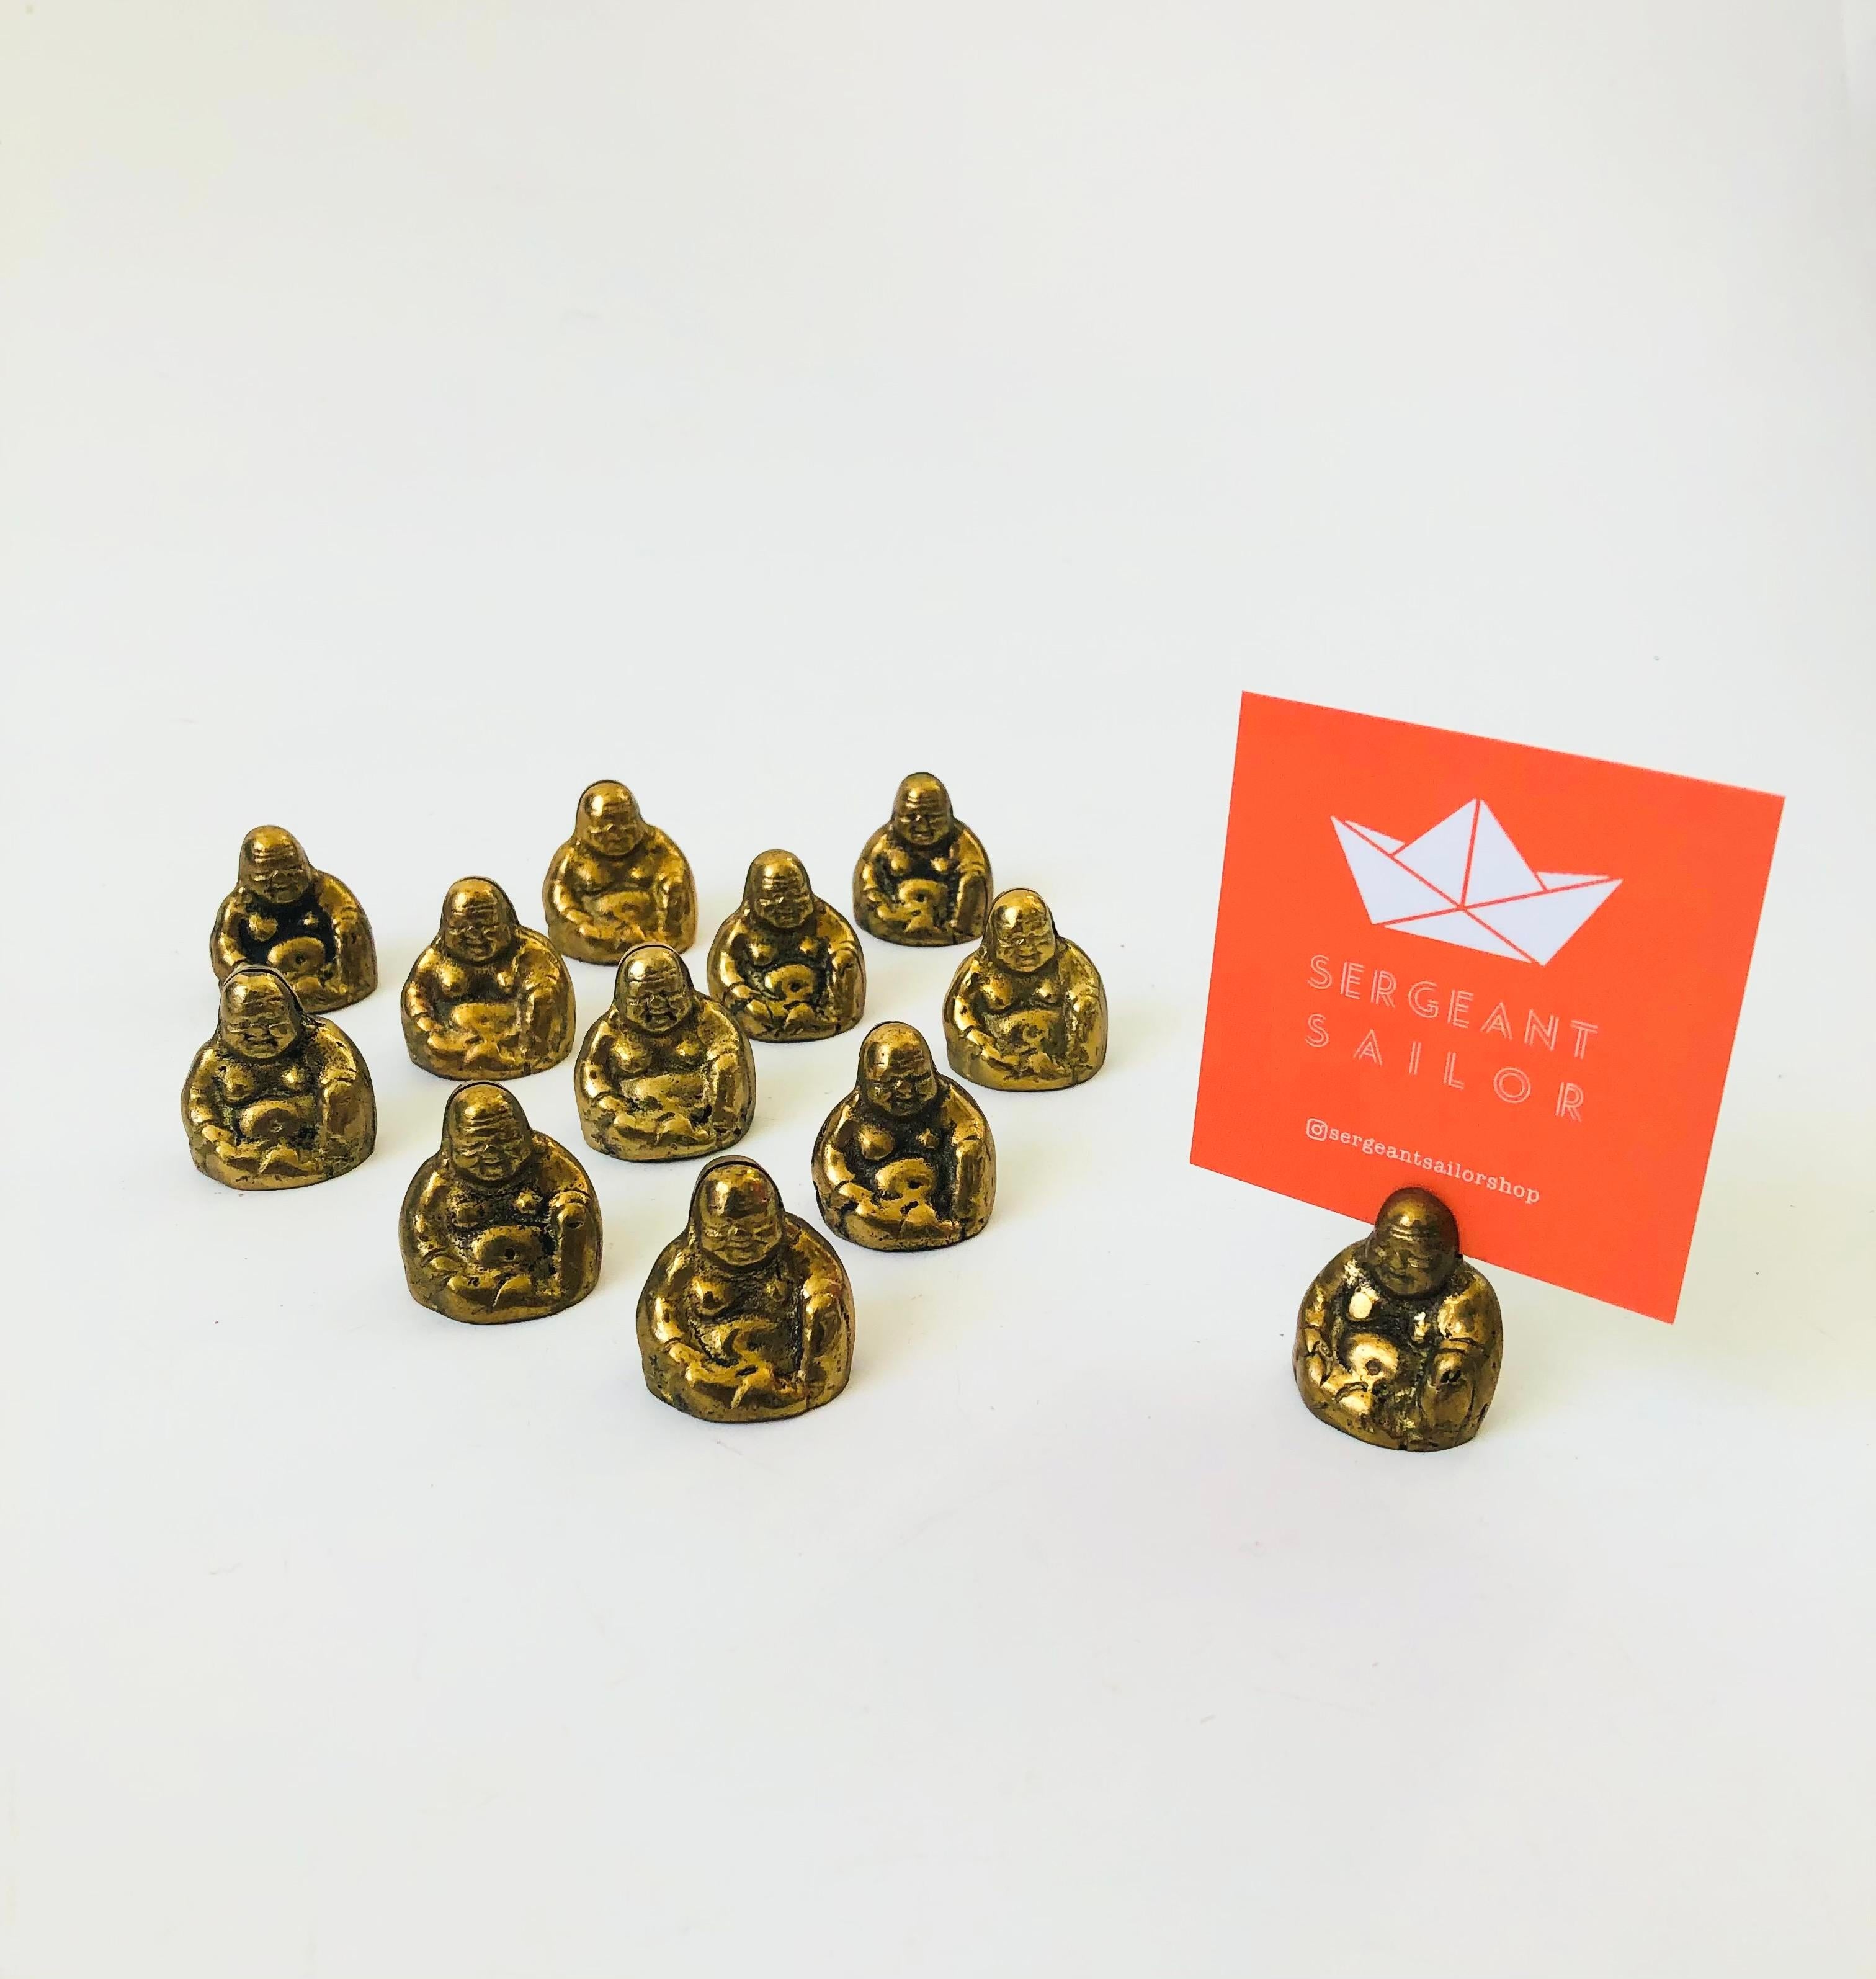 A set of 12 brass buddha place card holders. Each with a slot on top for holding a note. Nice heavy weight to the buddhas.

